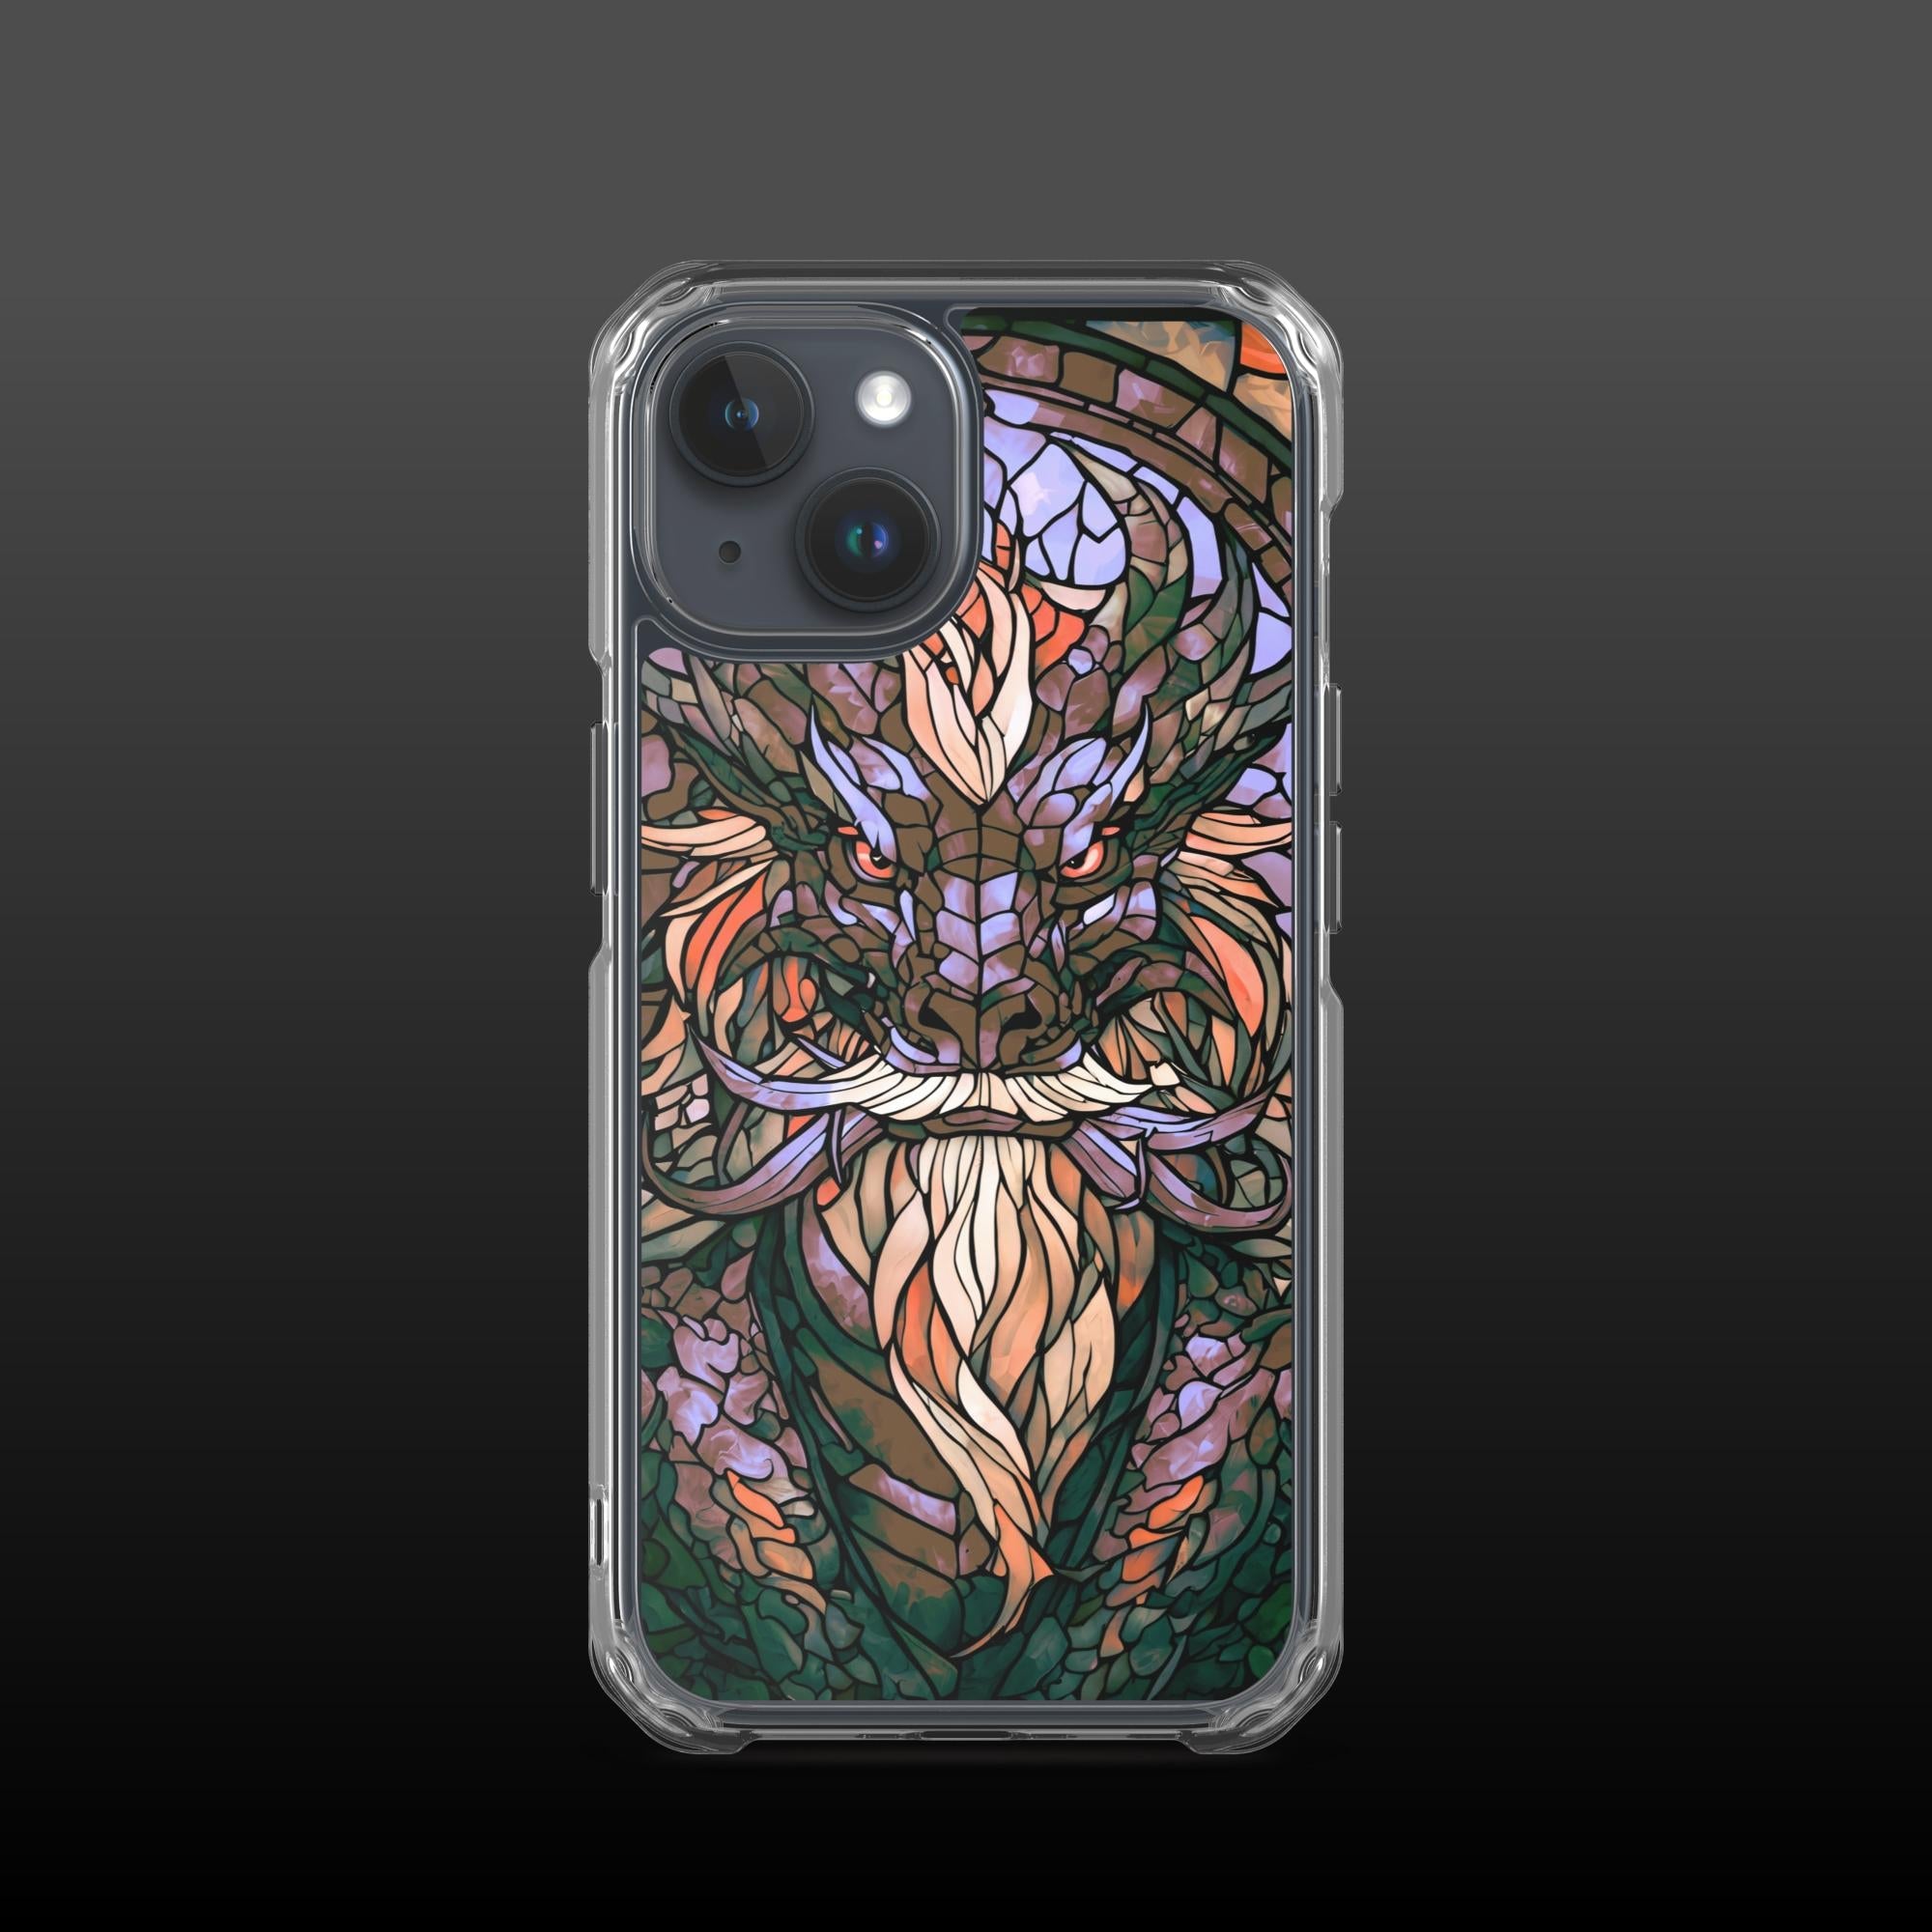 "Elder tyrant" clear iphone case - Clear iphone case - Ever colorful